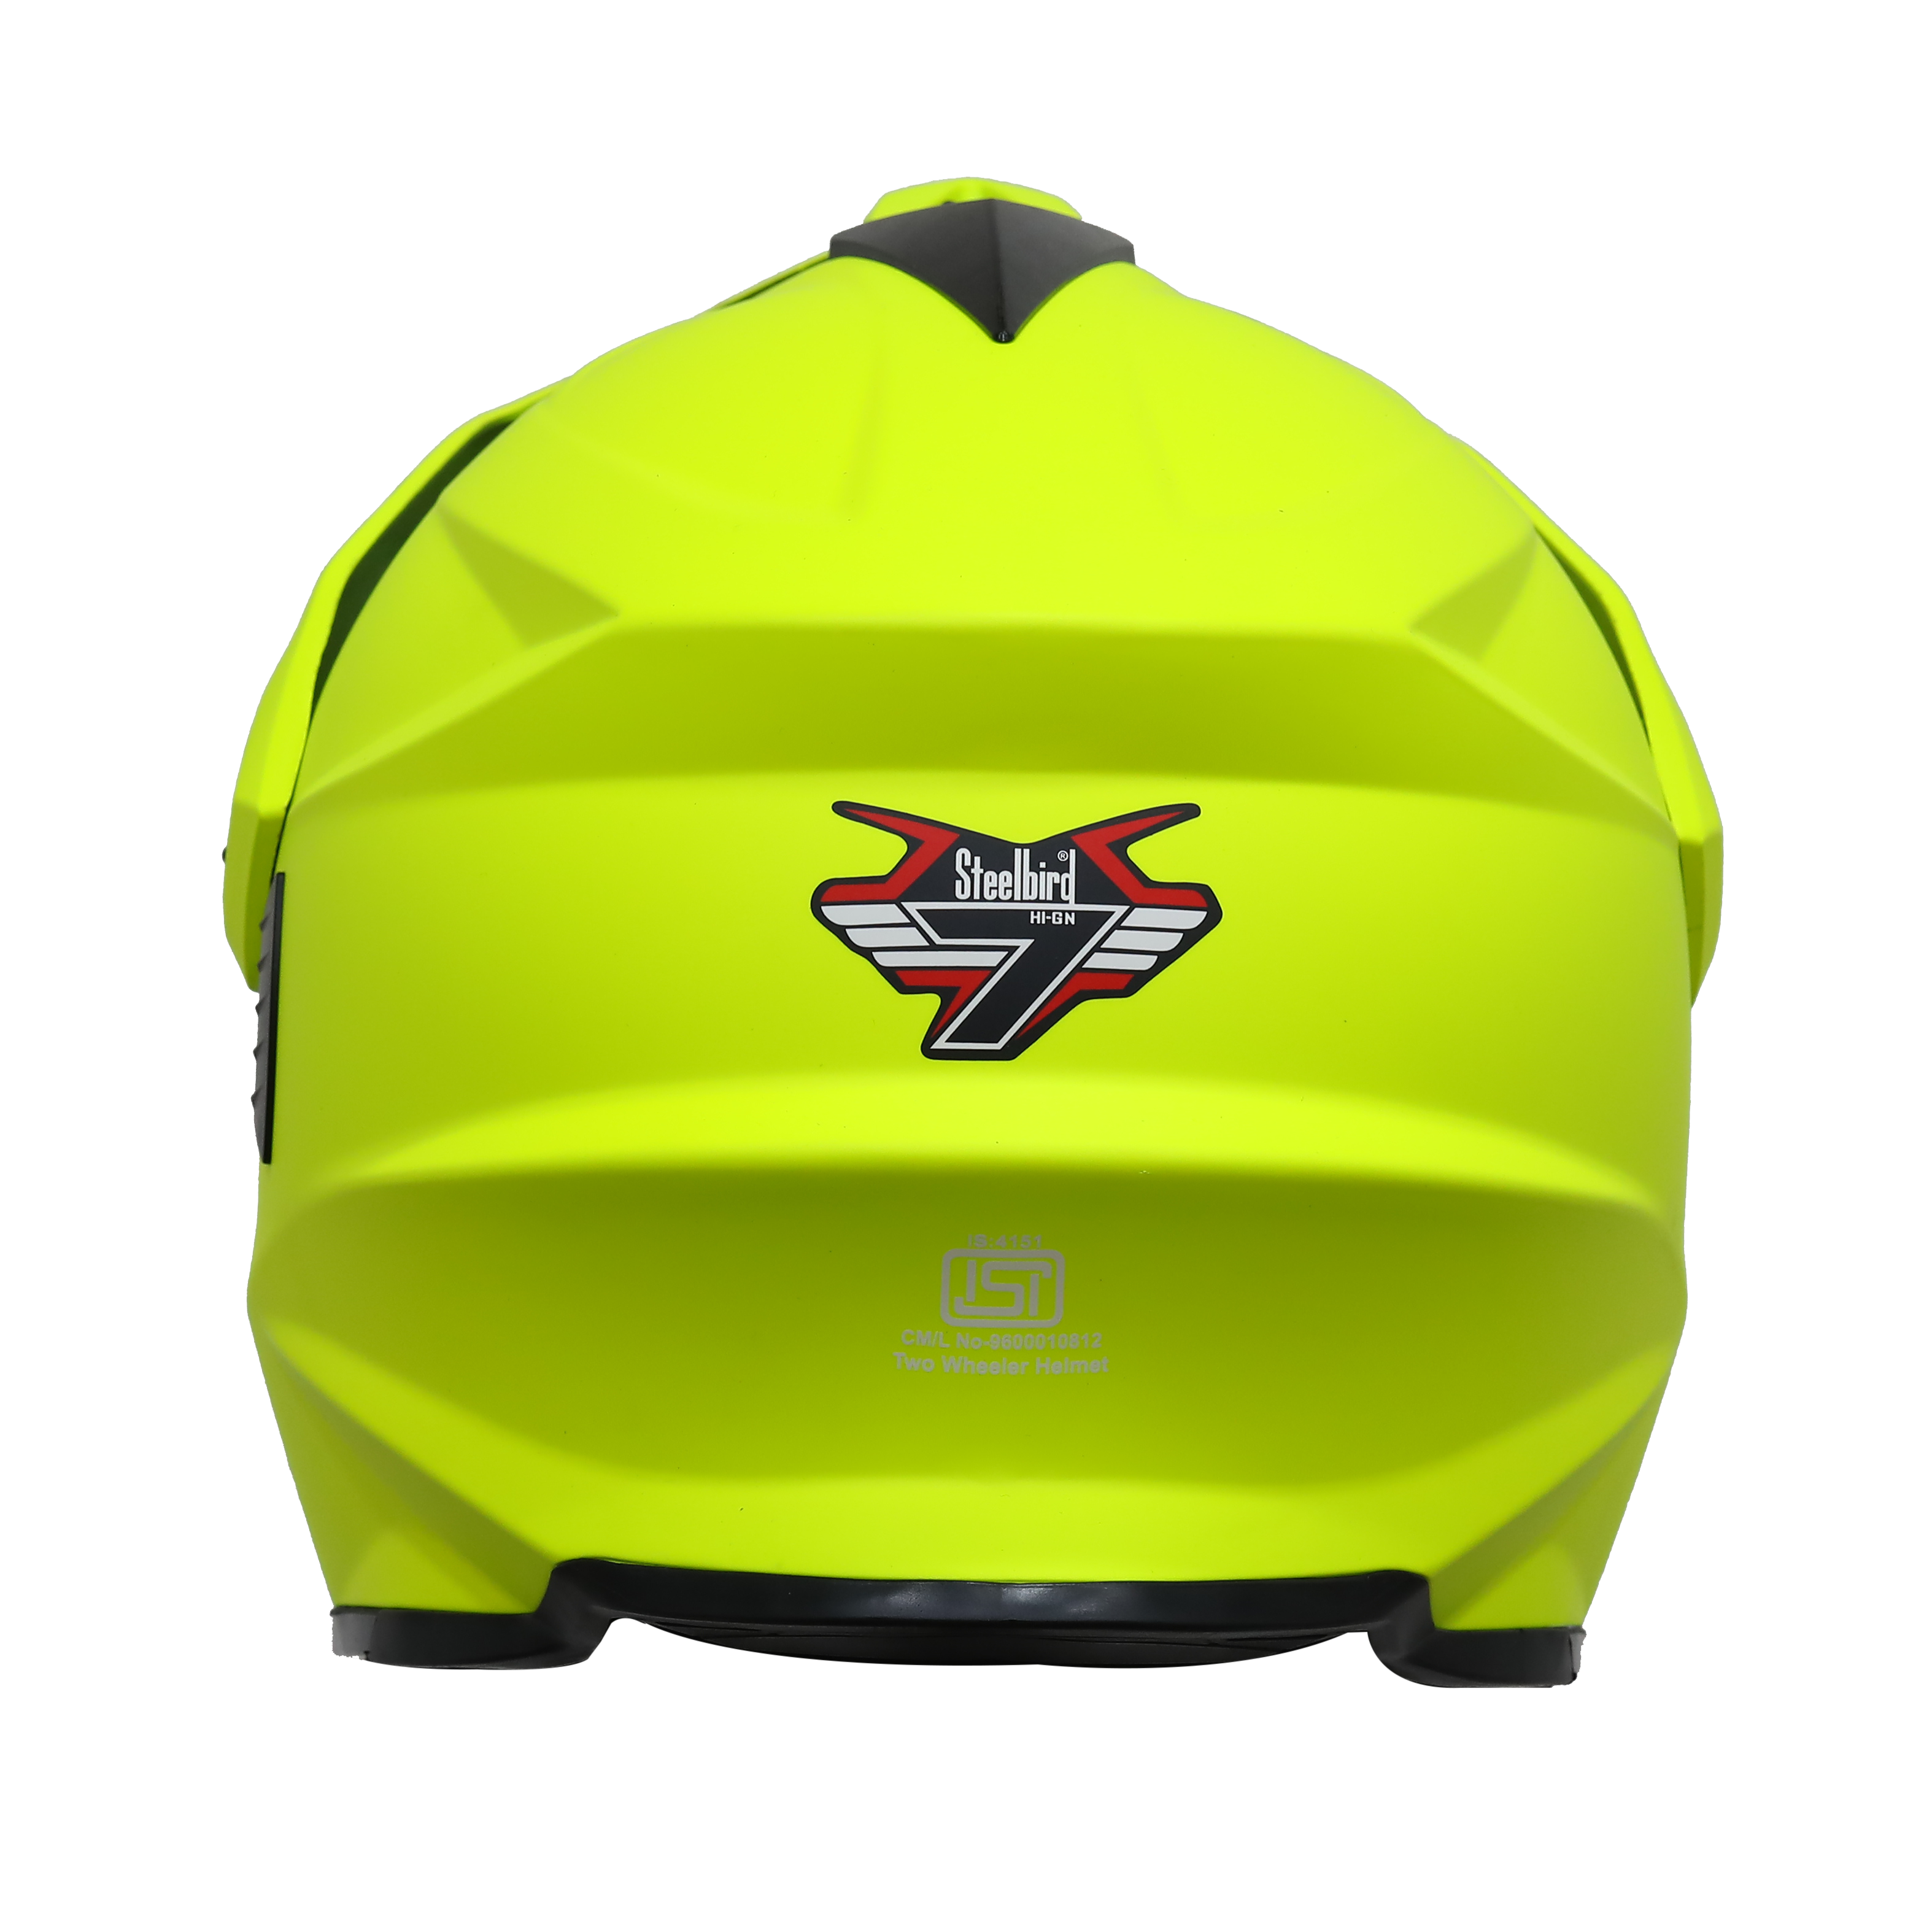 SB-42 Turf Single Visor Glossy Fluo Neon With Blue Night Vision Visor (With Extra Clear Visor)